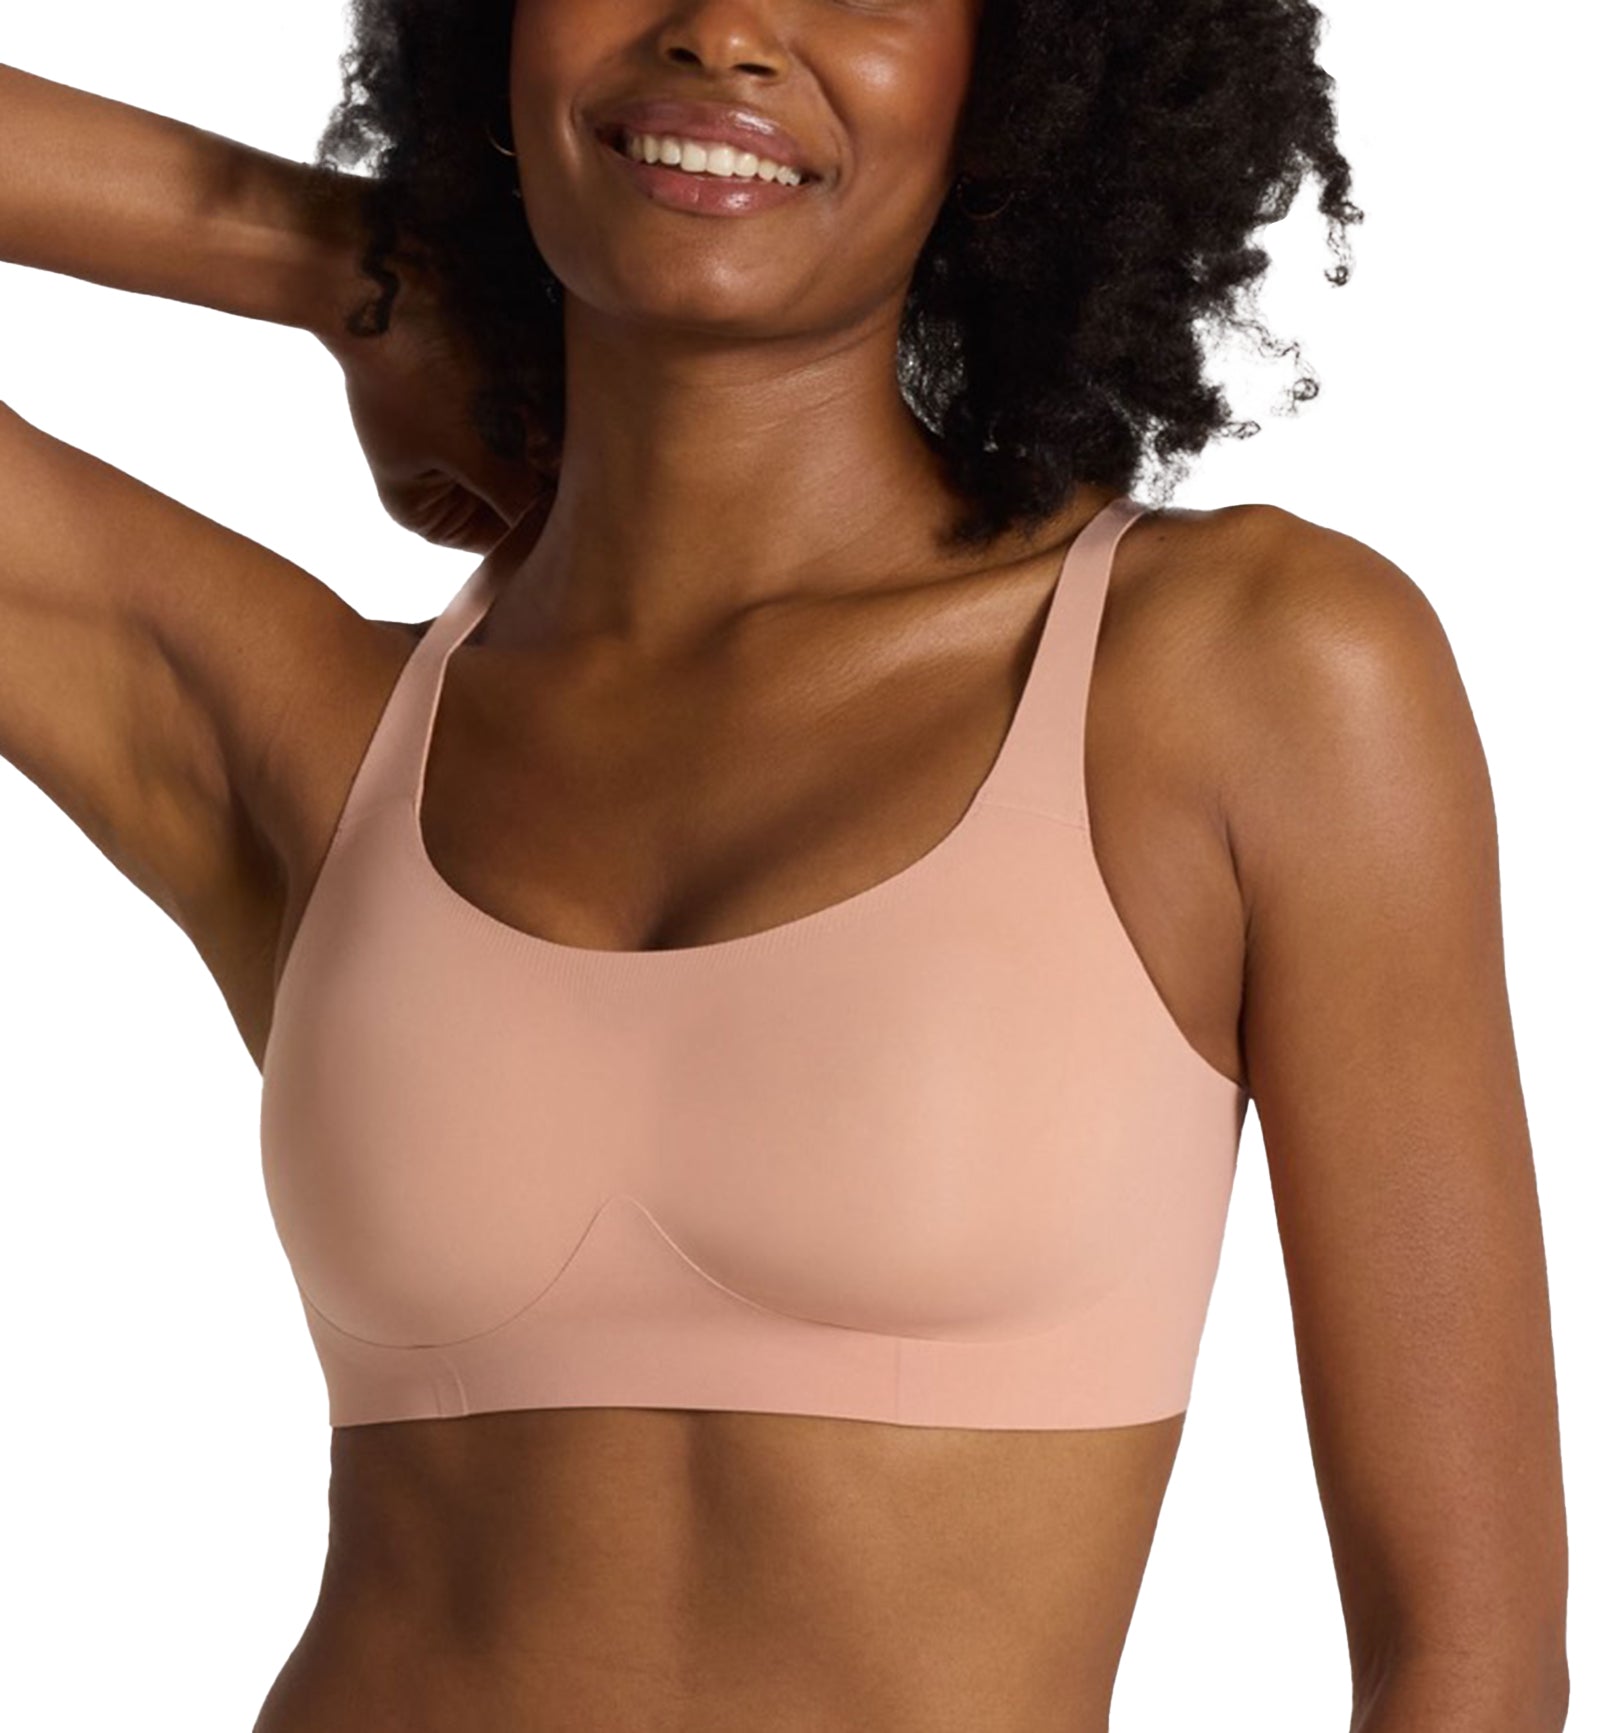 Evelyn & Bobbie STRUCTURED SCOOP Bralette (1801),Small,Himalayan Salt - Himalayan Salt,Small